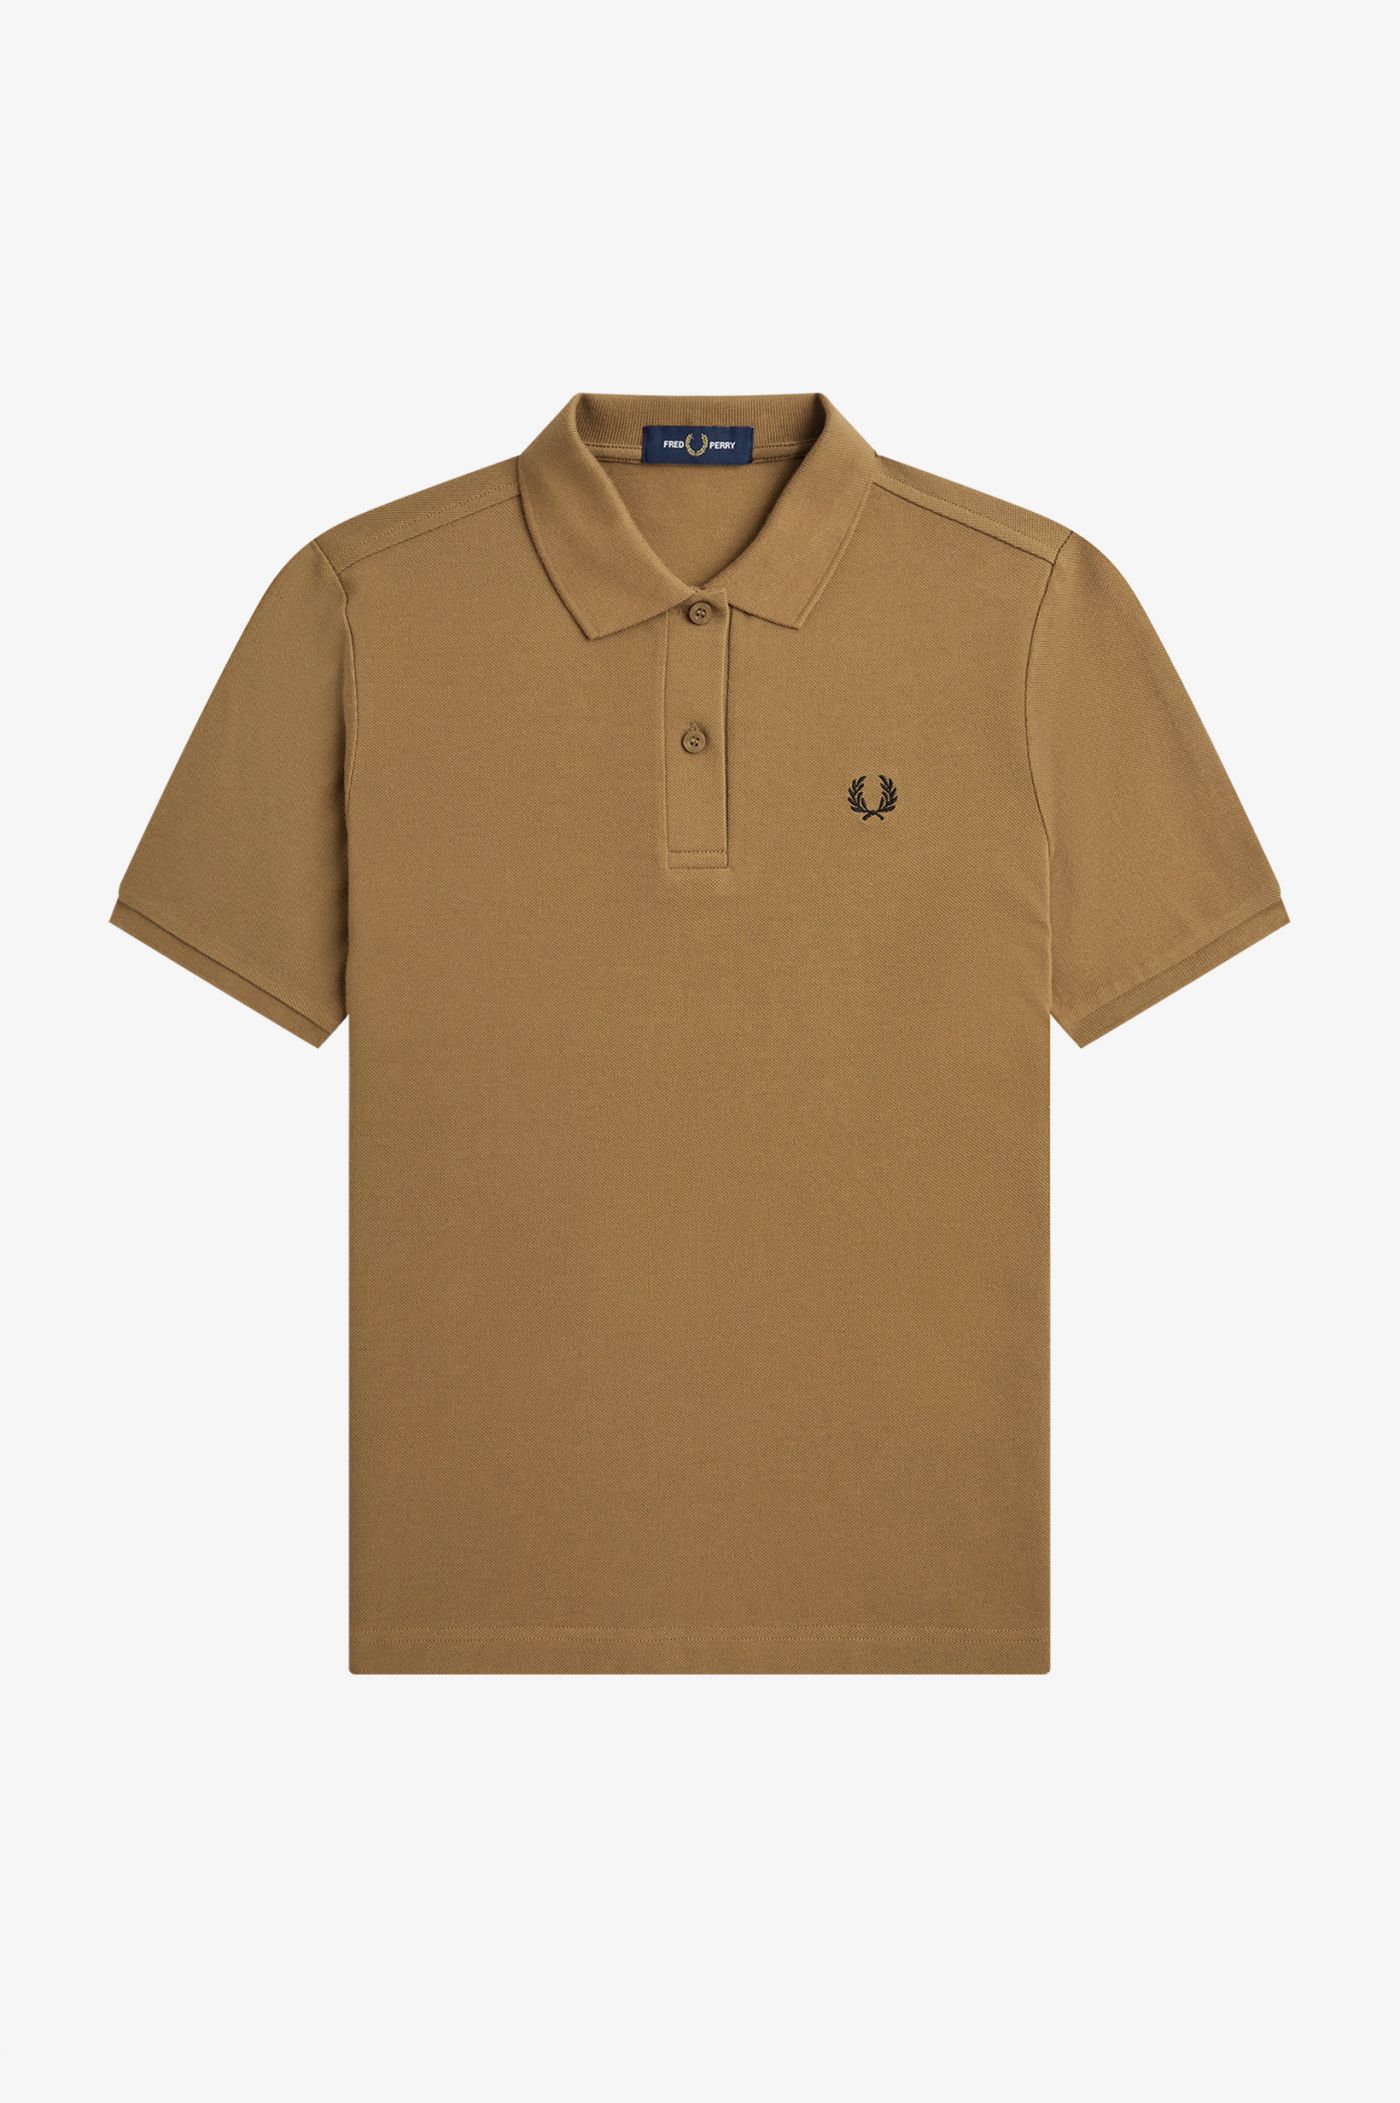 G6000 - Shaded Stone / Black | The Fred Perry Shirt | Women's